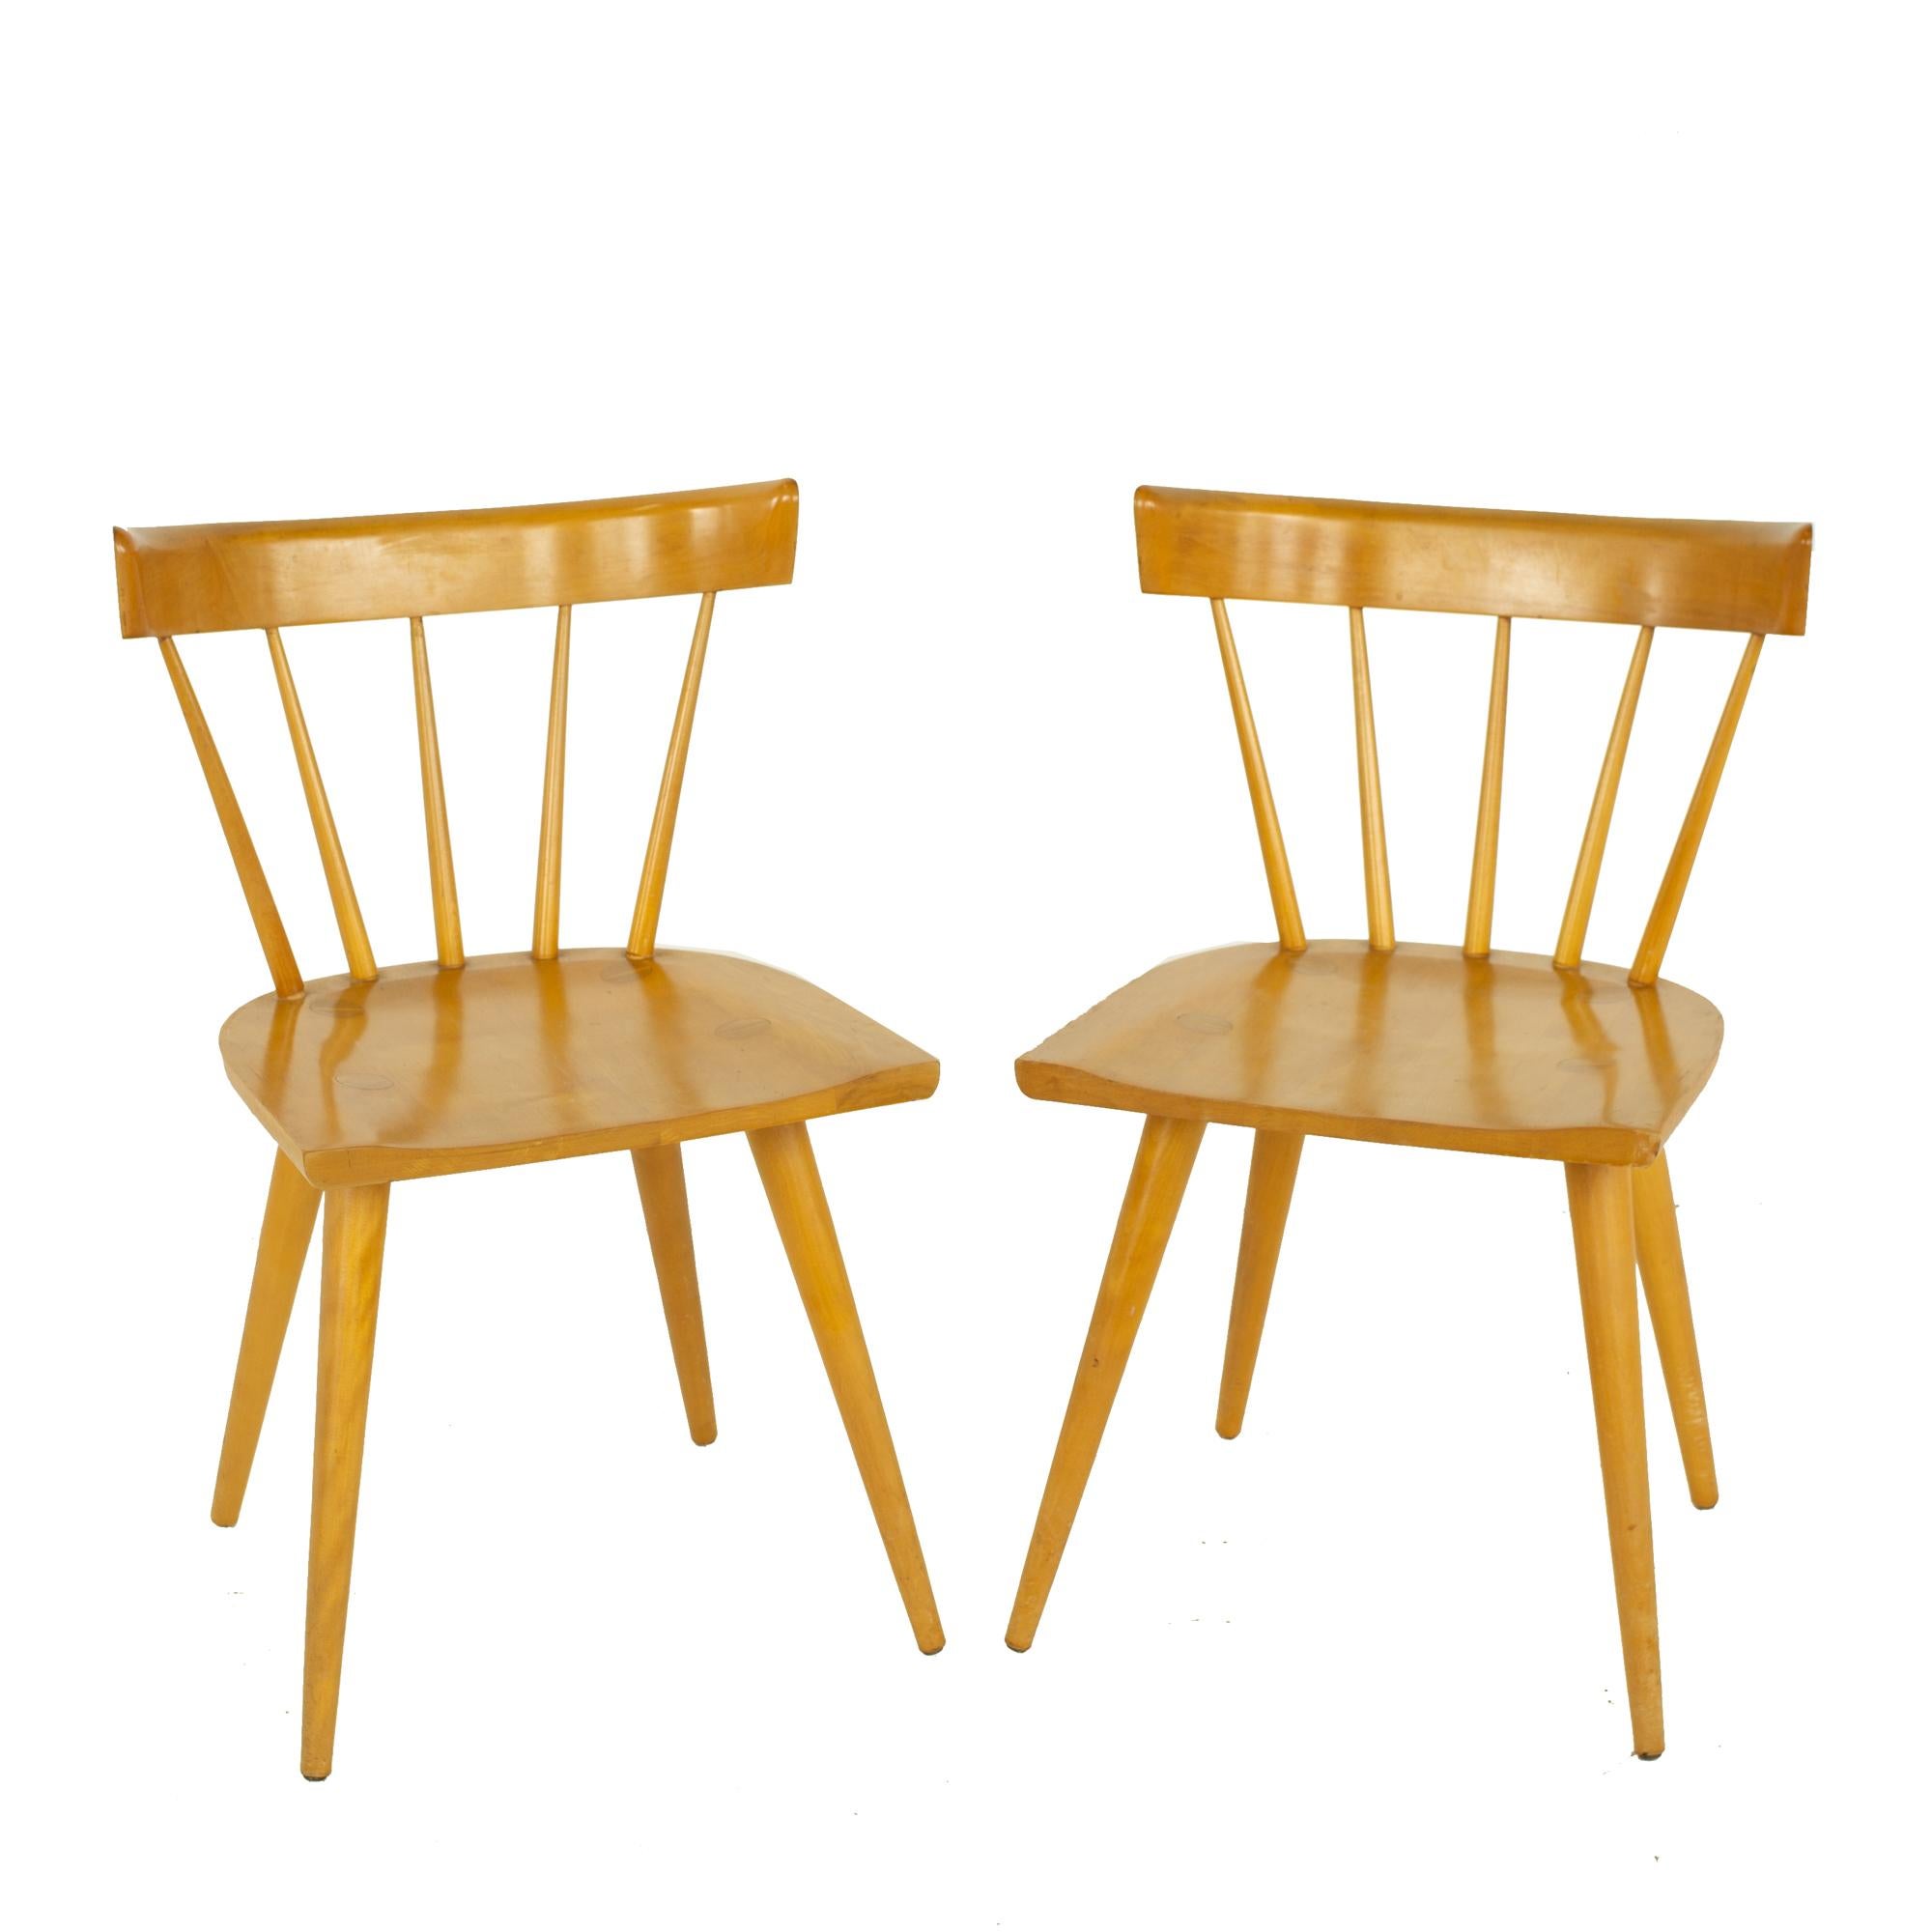 Paul McCobb for Planner Group mid century maple dining chairs - pair

Each chair measures: 19.5 wide x 19.5 deep x 31 high, with a seat height of 17.5 inches and chair clearance of 17.5 inches

?All pieces of furniture can be had in what we call